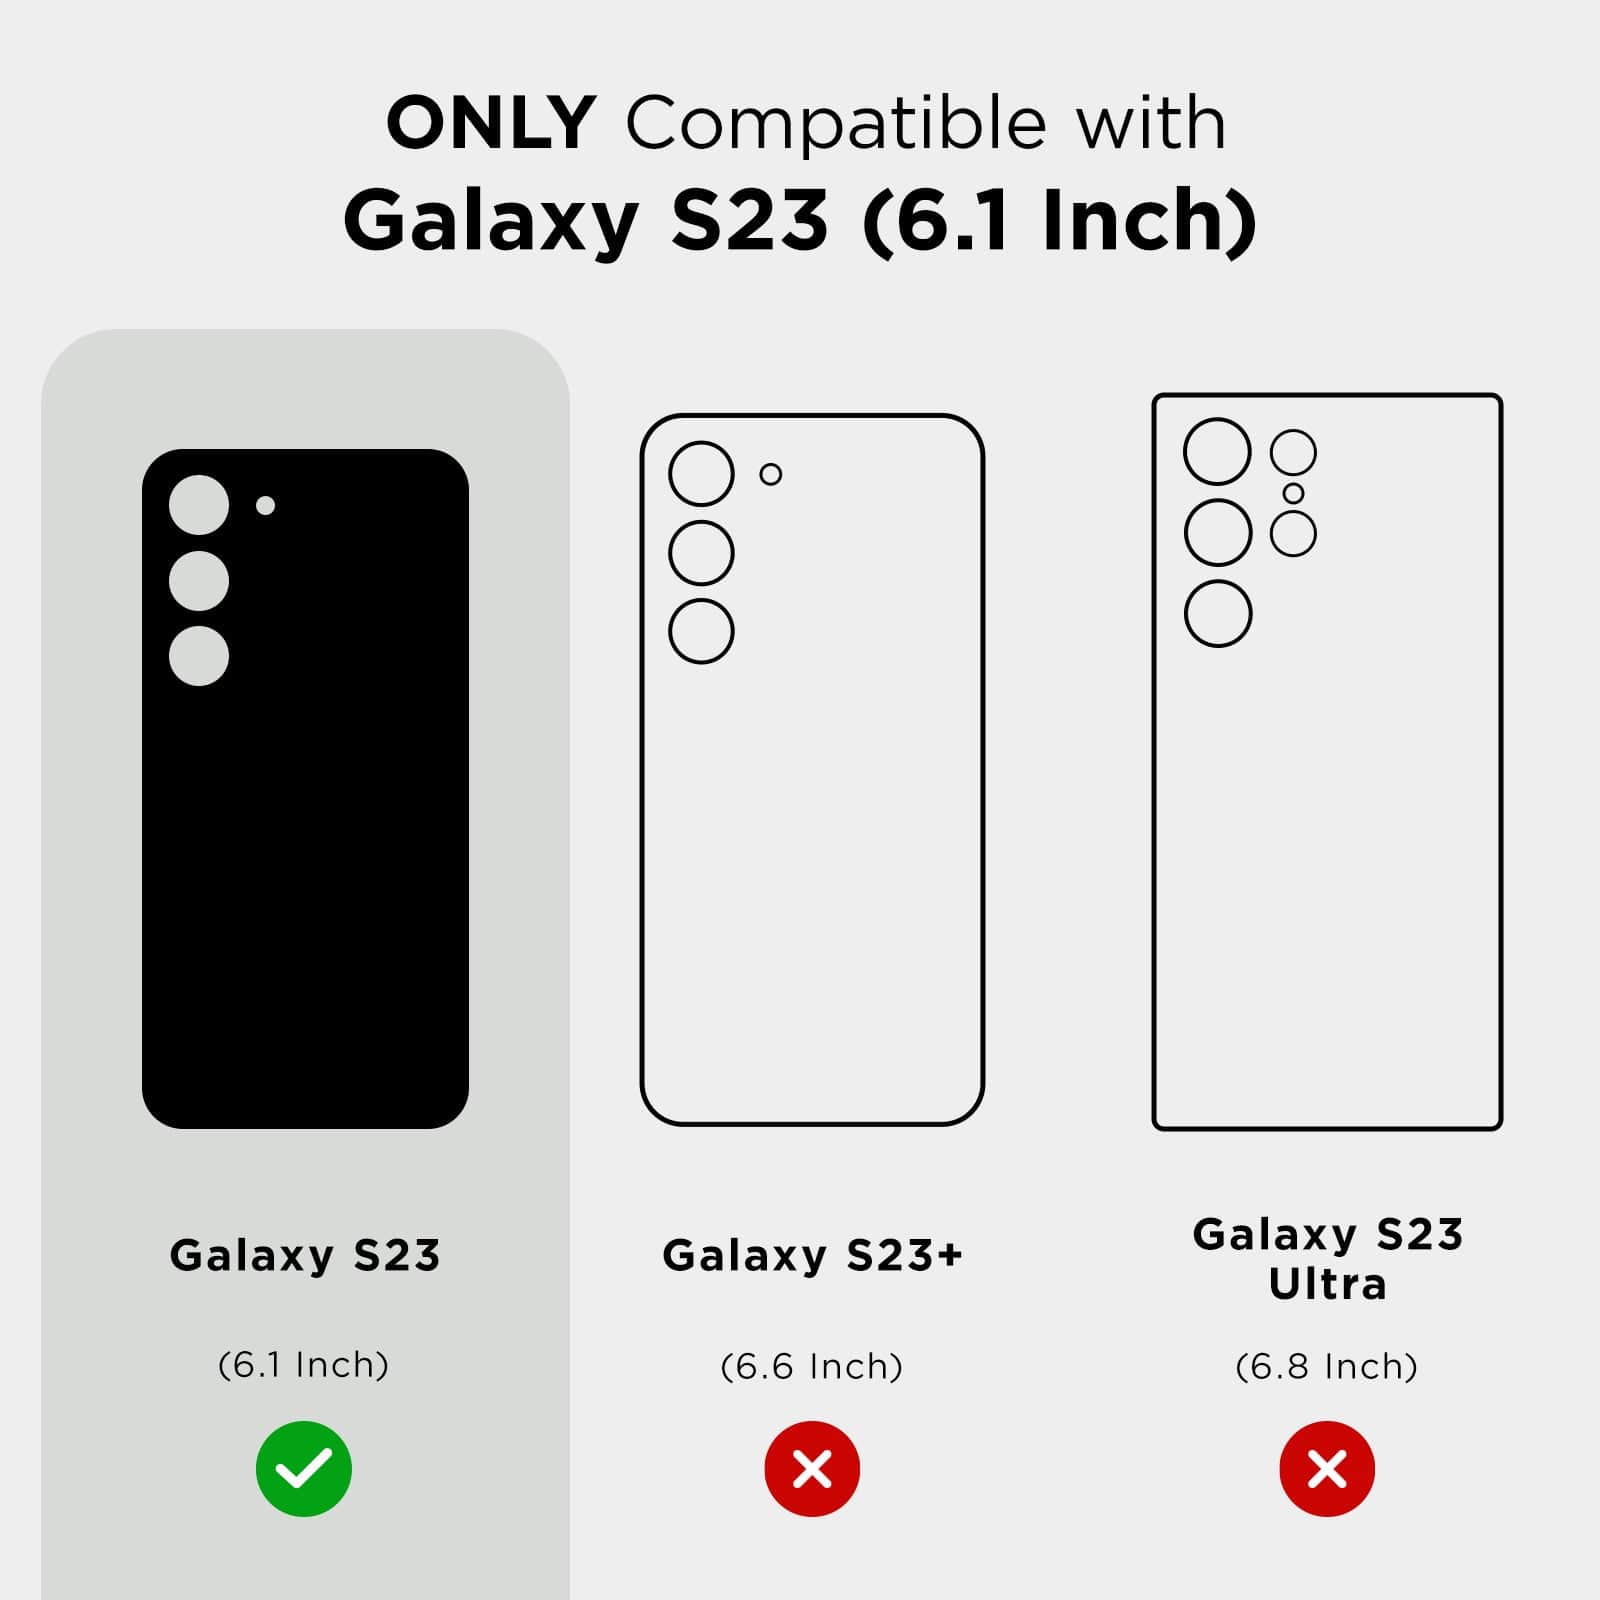 ONLY COMPATIBLE WITH GALAXY S23